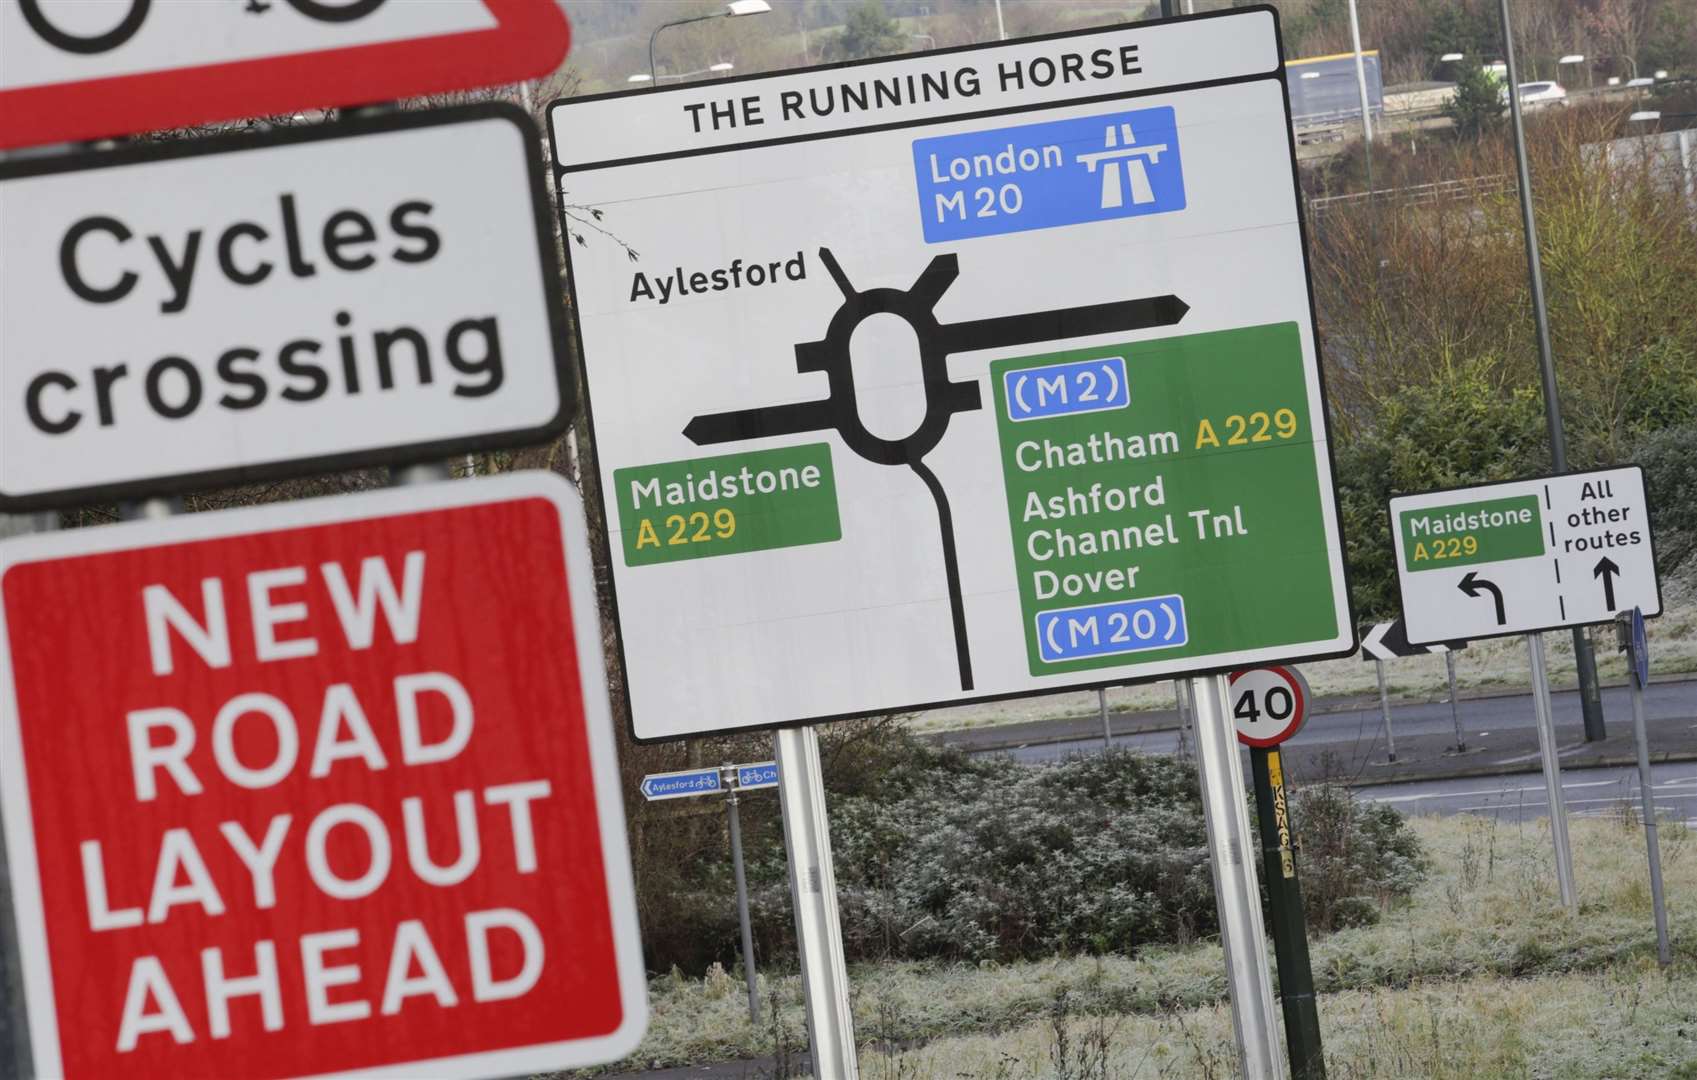 Work on the upgrade to the Running Horse Roundabout will start next month